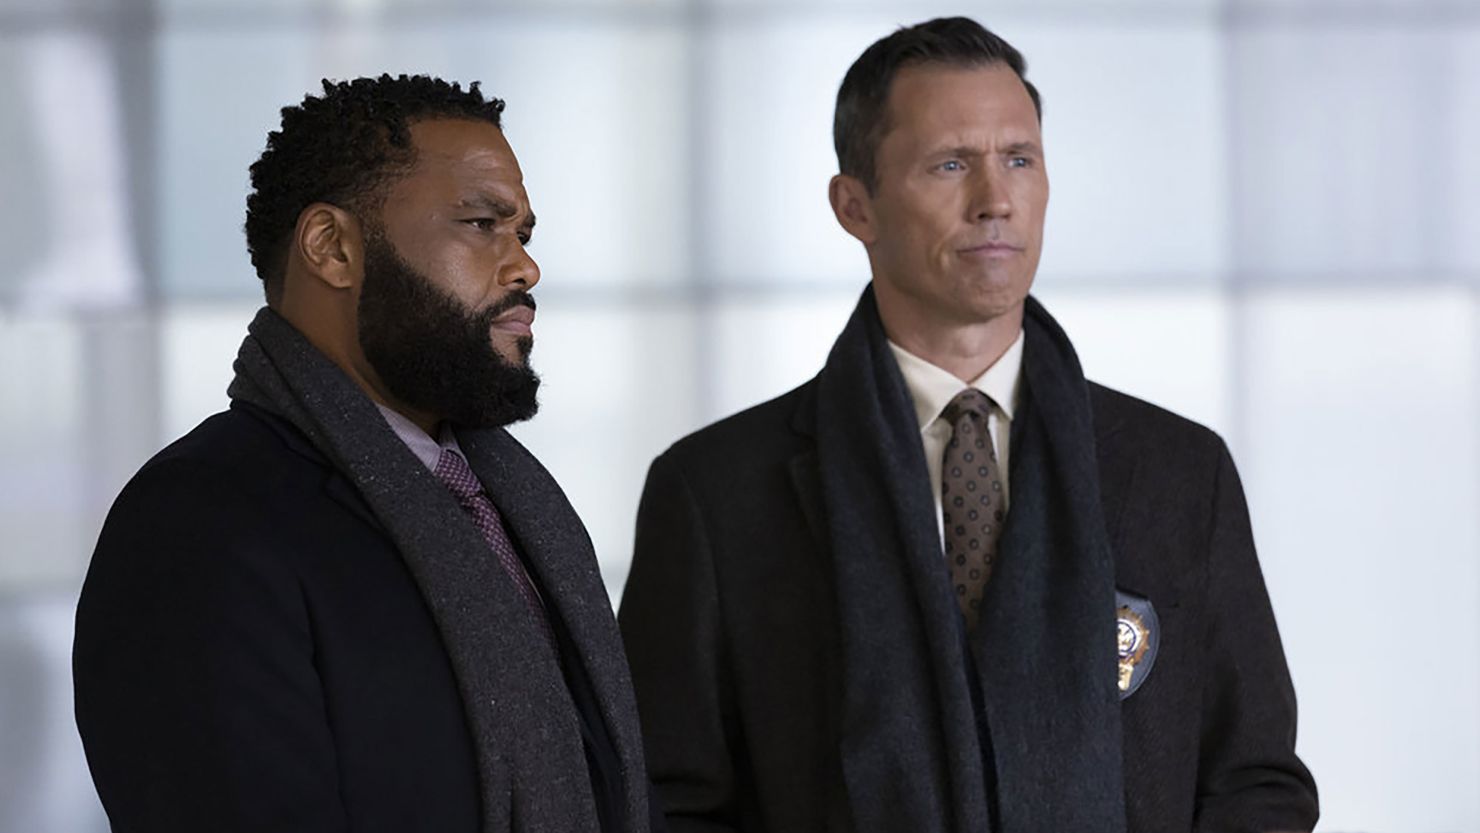 Anthony Anderson and Jeffrey Donovan in 'Law & Order.'